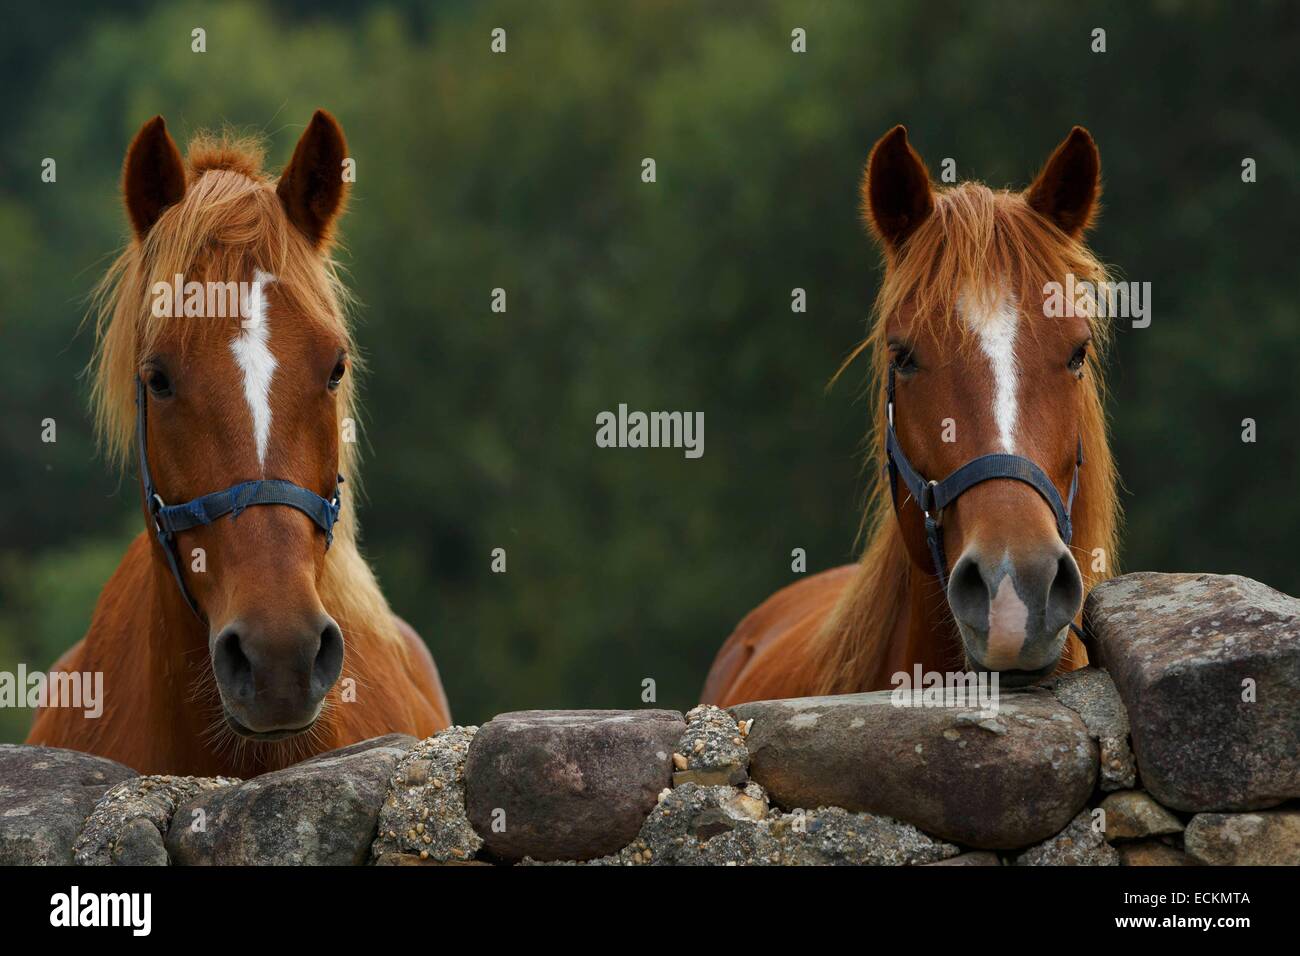 France, Pyrenees Atlantiques, Basque Country, Sare, domestic horses behind a stone wall Stock Photo